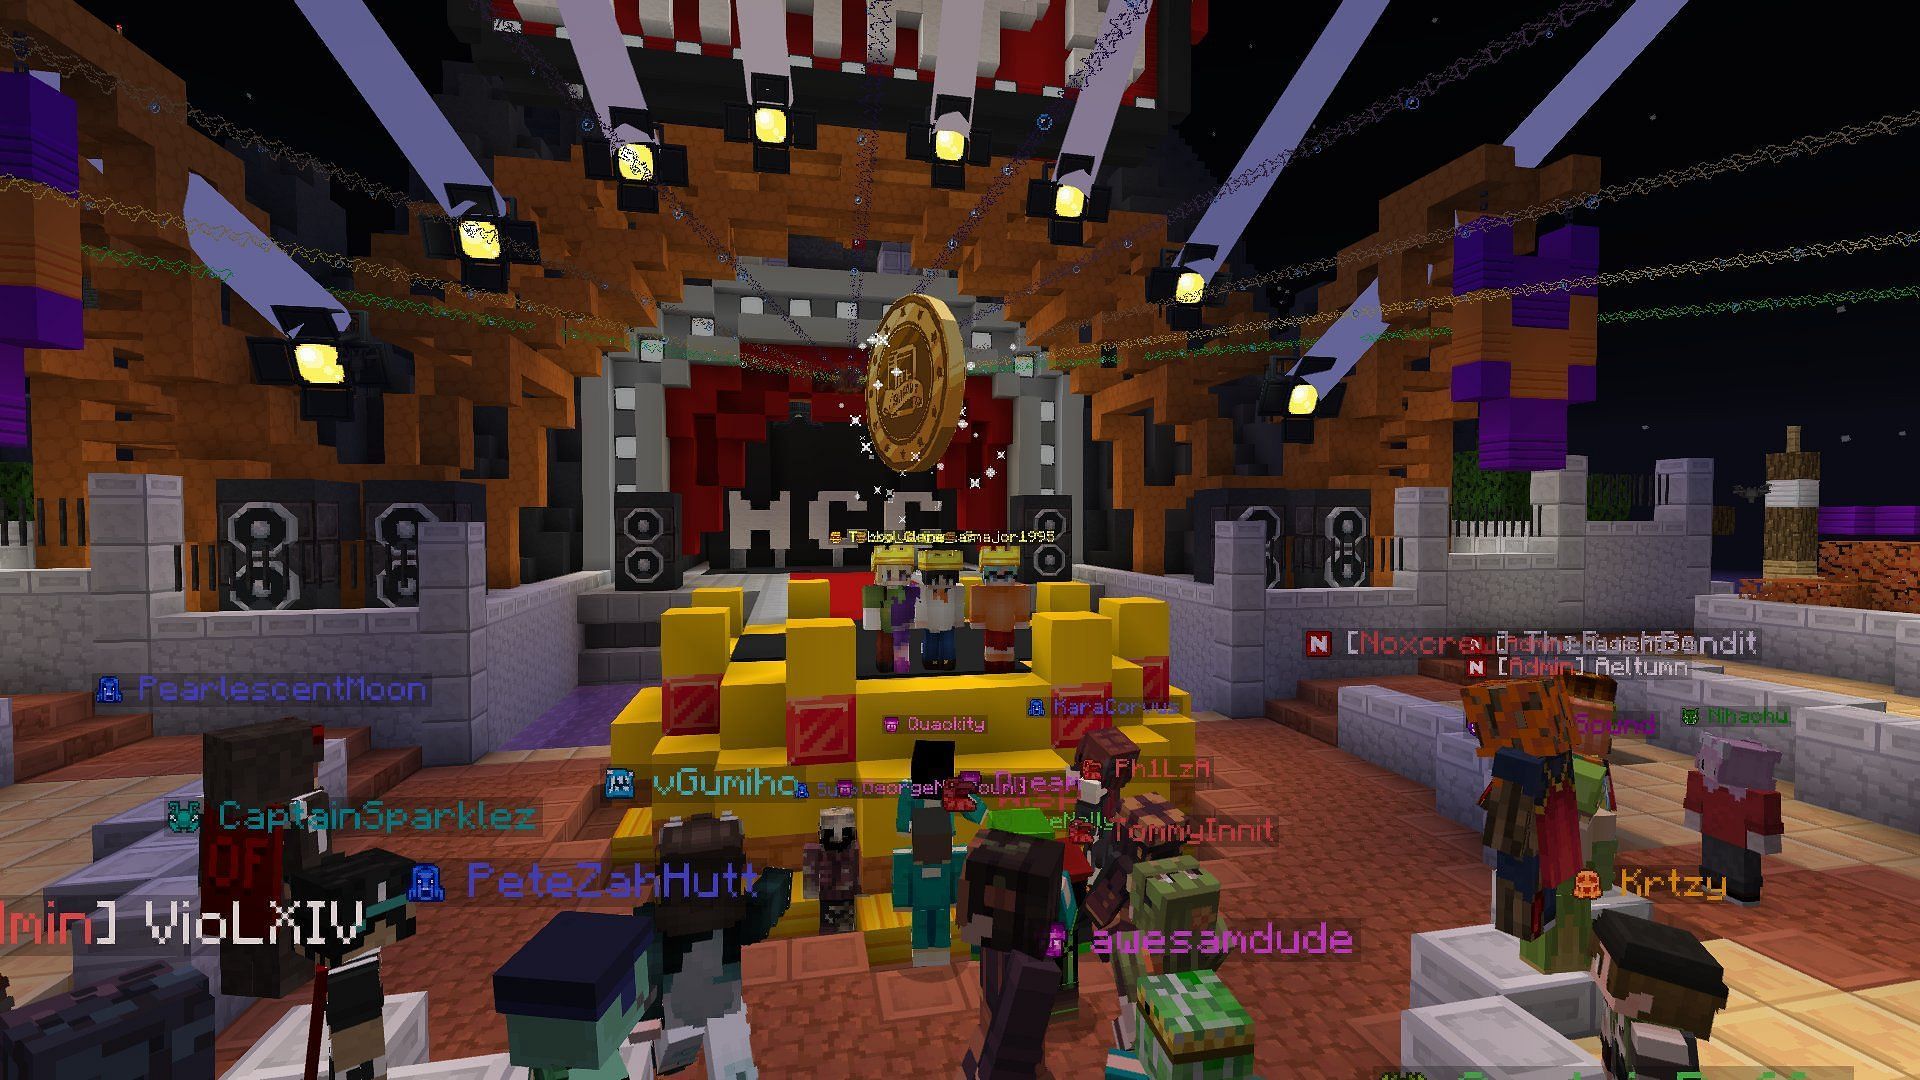 Team Mustard Mummies claims the final win for Minecraft Championship 18 (Image via MCChampionships_ on Twitter)